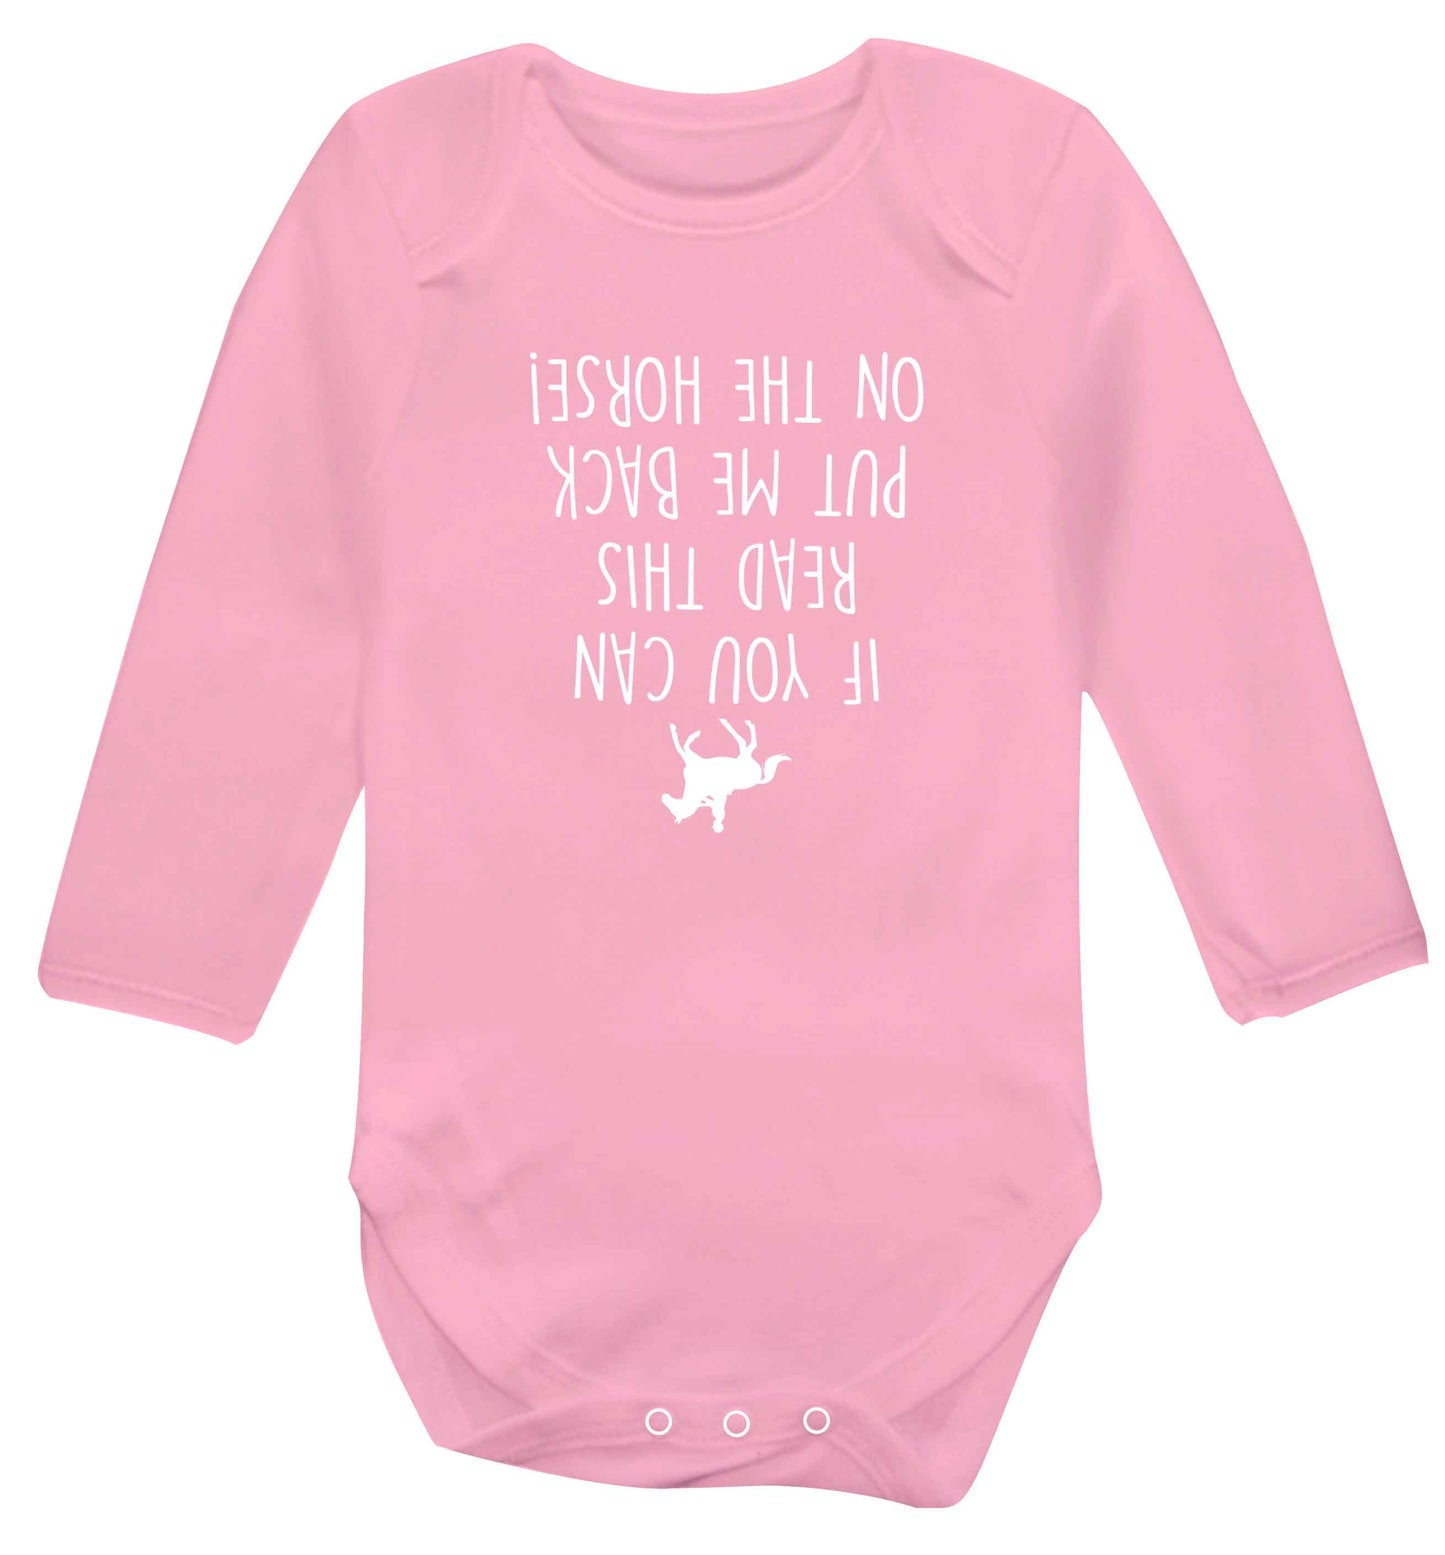 If you can read this put me back on the horse baby vest long sleeved pale pink 6-12 months